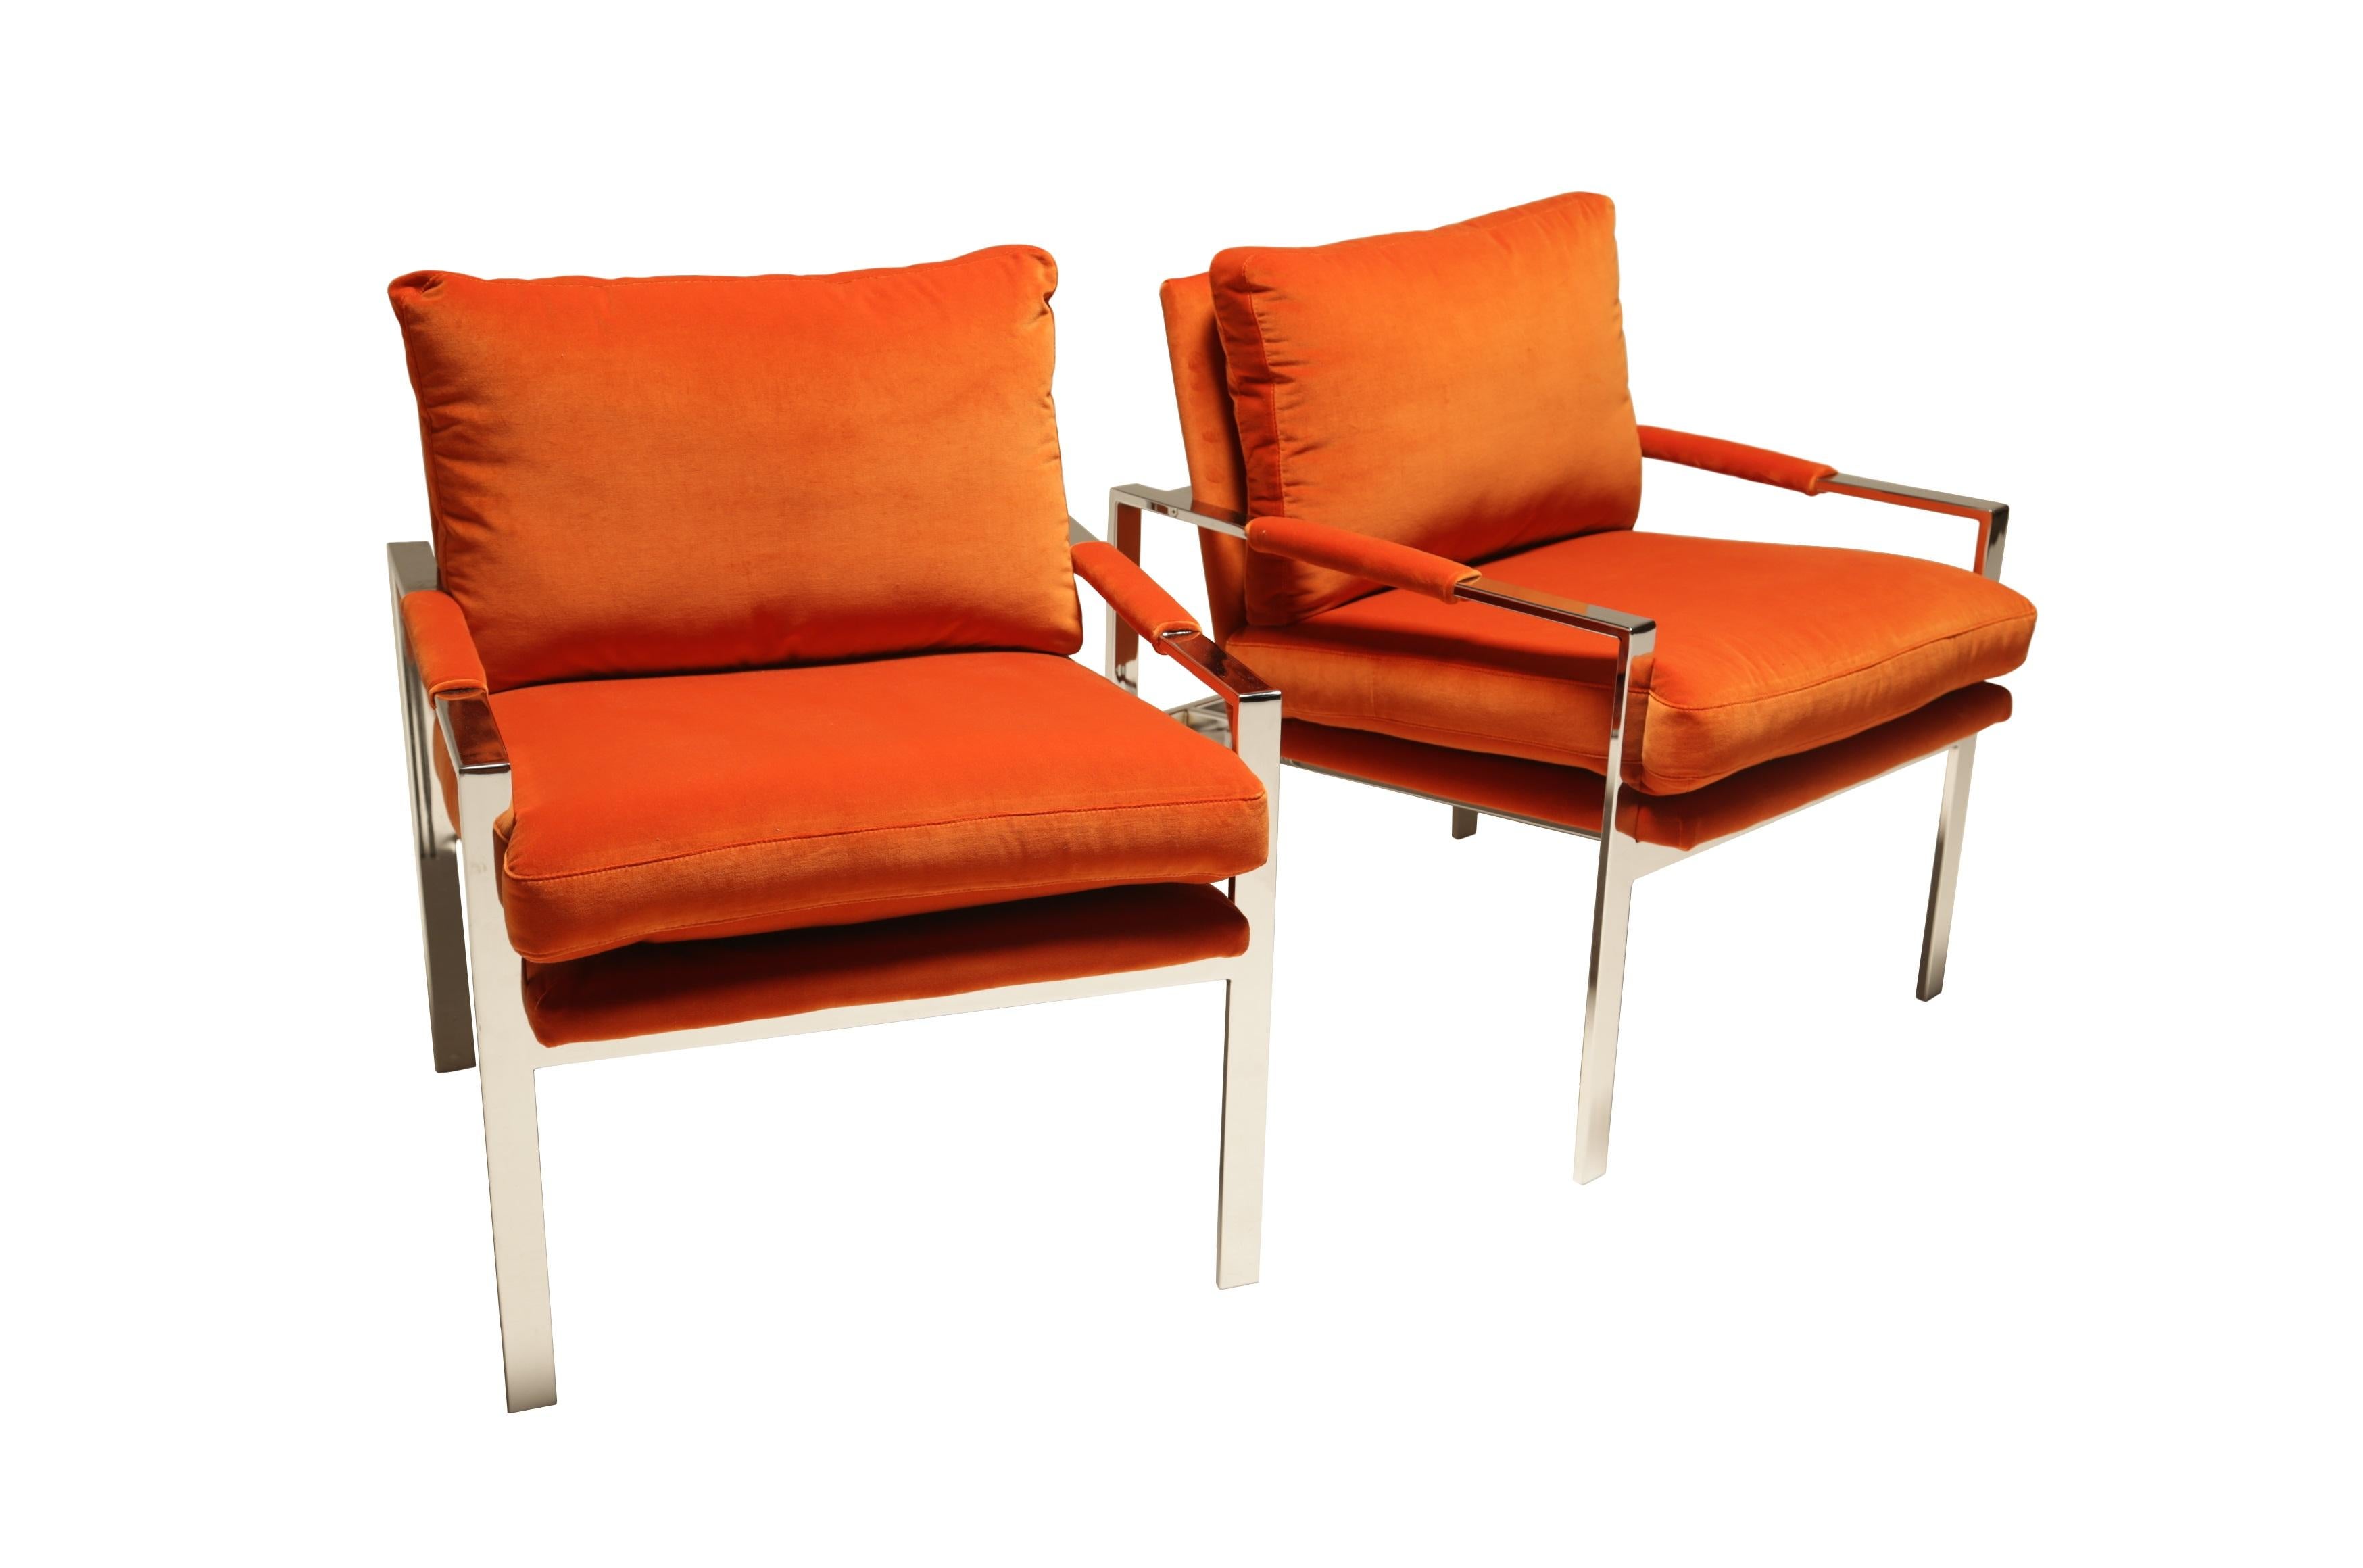 For your consideration is a pair of Milo Baughman flat bar armchairs. Originally designed in 1966, the 951 model lounge chair is one of the most iconic mid-century modern chair designs. Each chair showcasing a clean-lined slender squarish frame,